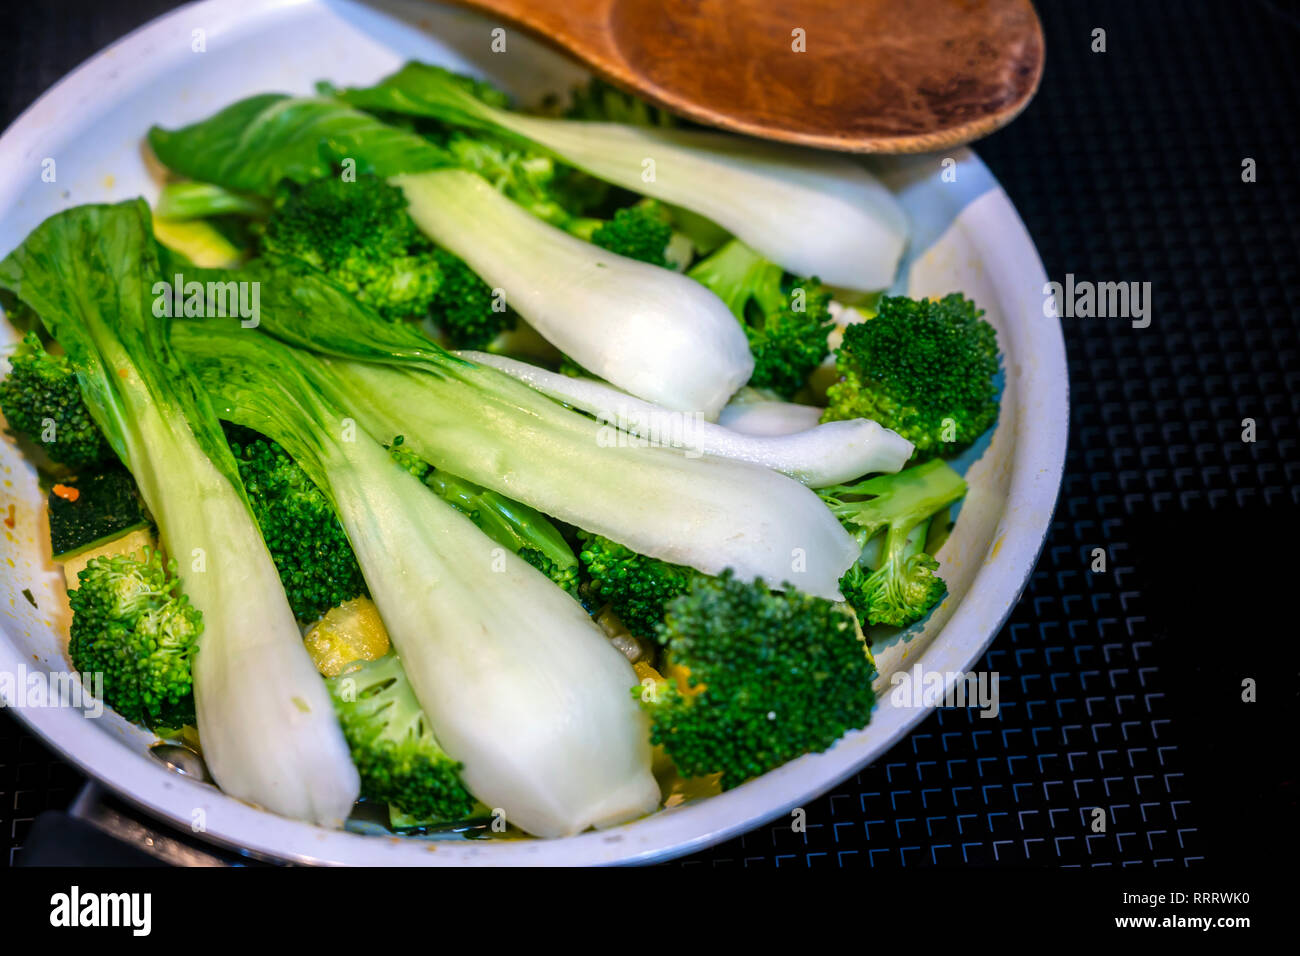 Long-leafed Cabbage with onion and broccoli stew in frying pan on an electric stove - dietary low-calorie natural organic dish that is good for your h Stock Photo